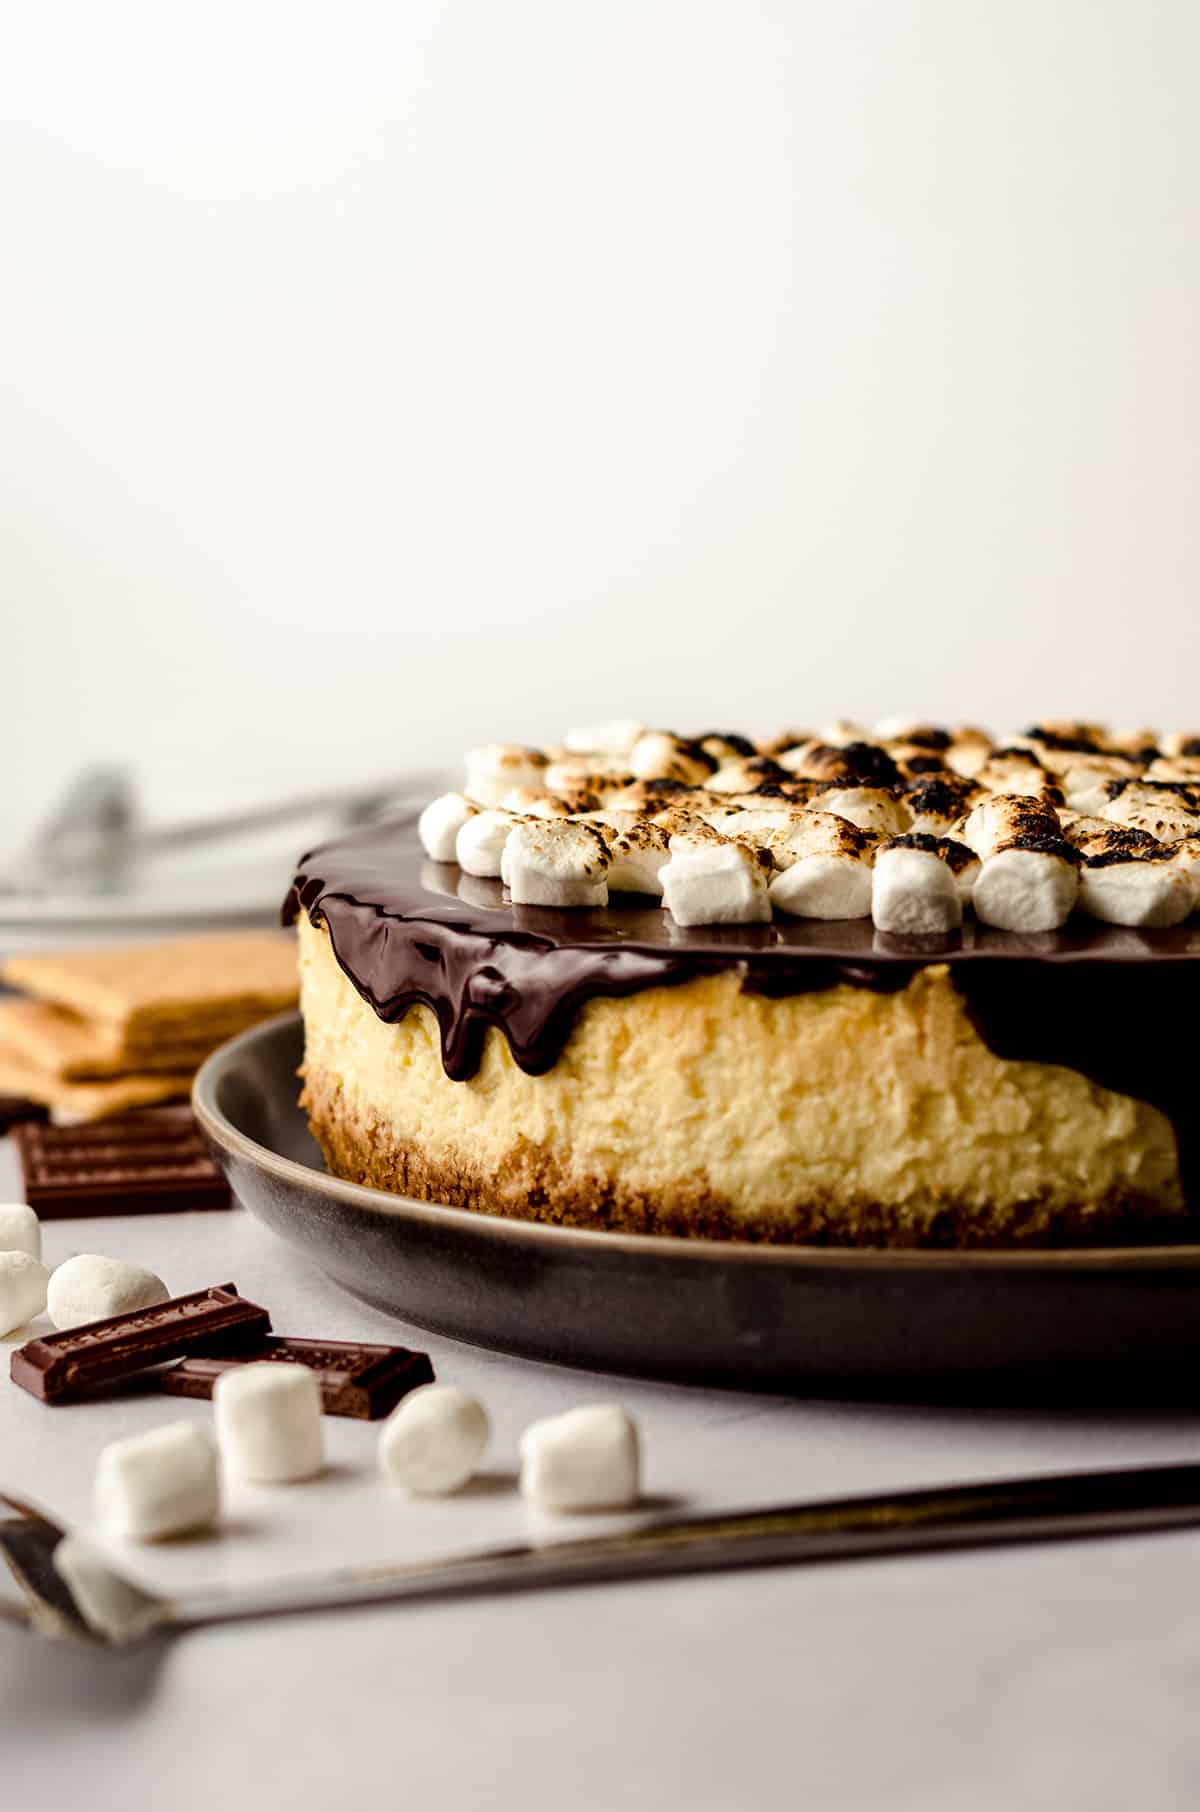 A large cheesecake with a chocolate fudge topping and toasted marshmallows.